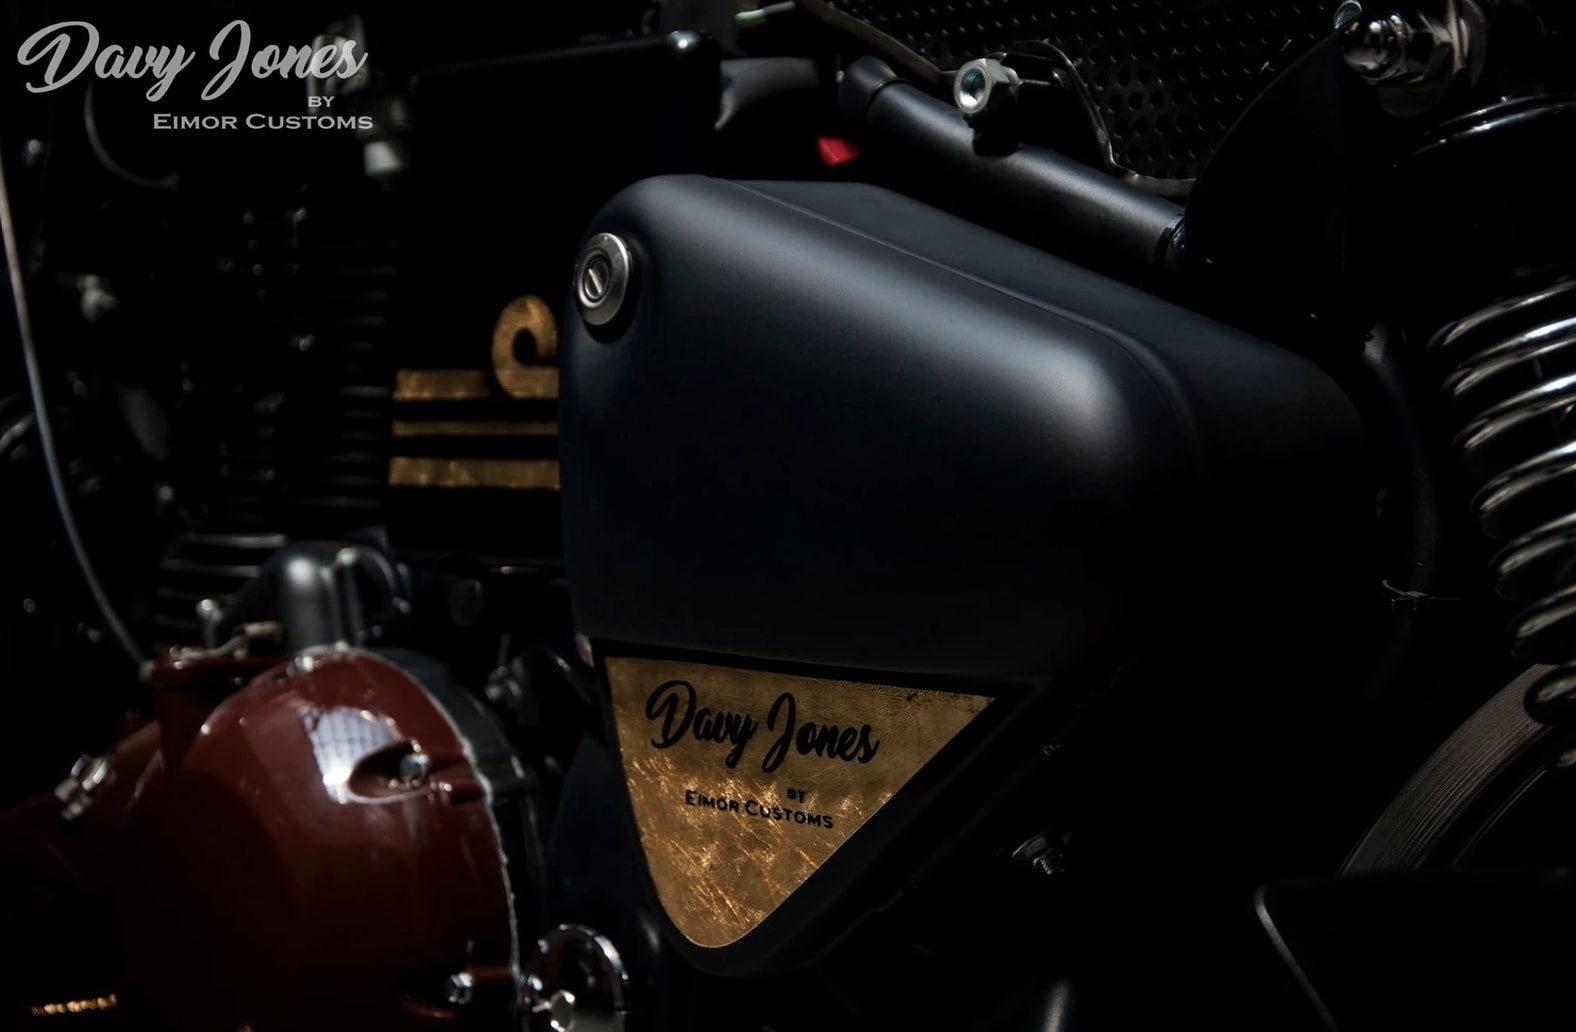 EIMOR Royal Enfield TB 350 Davy Jones Edition Details and Photos - side